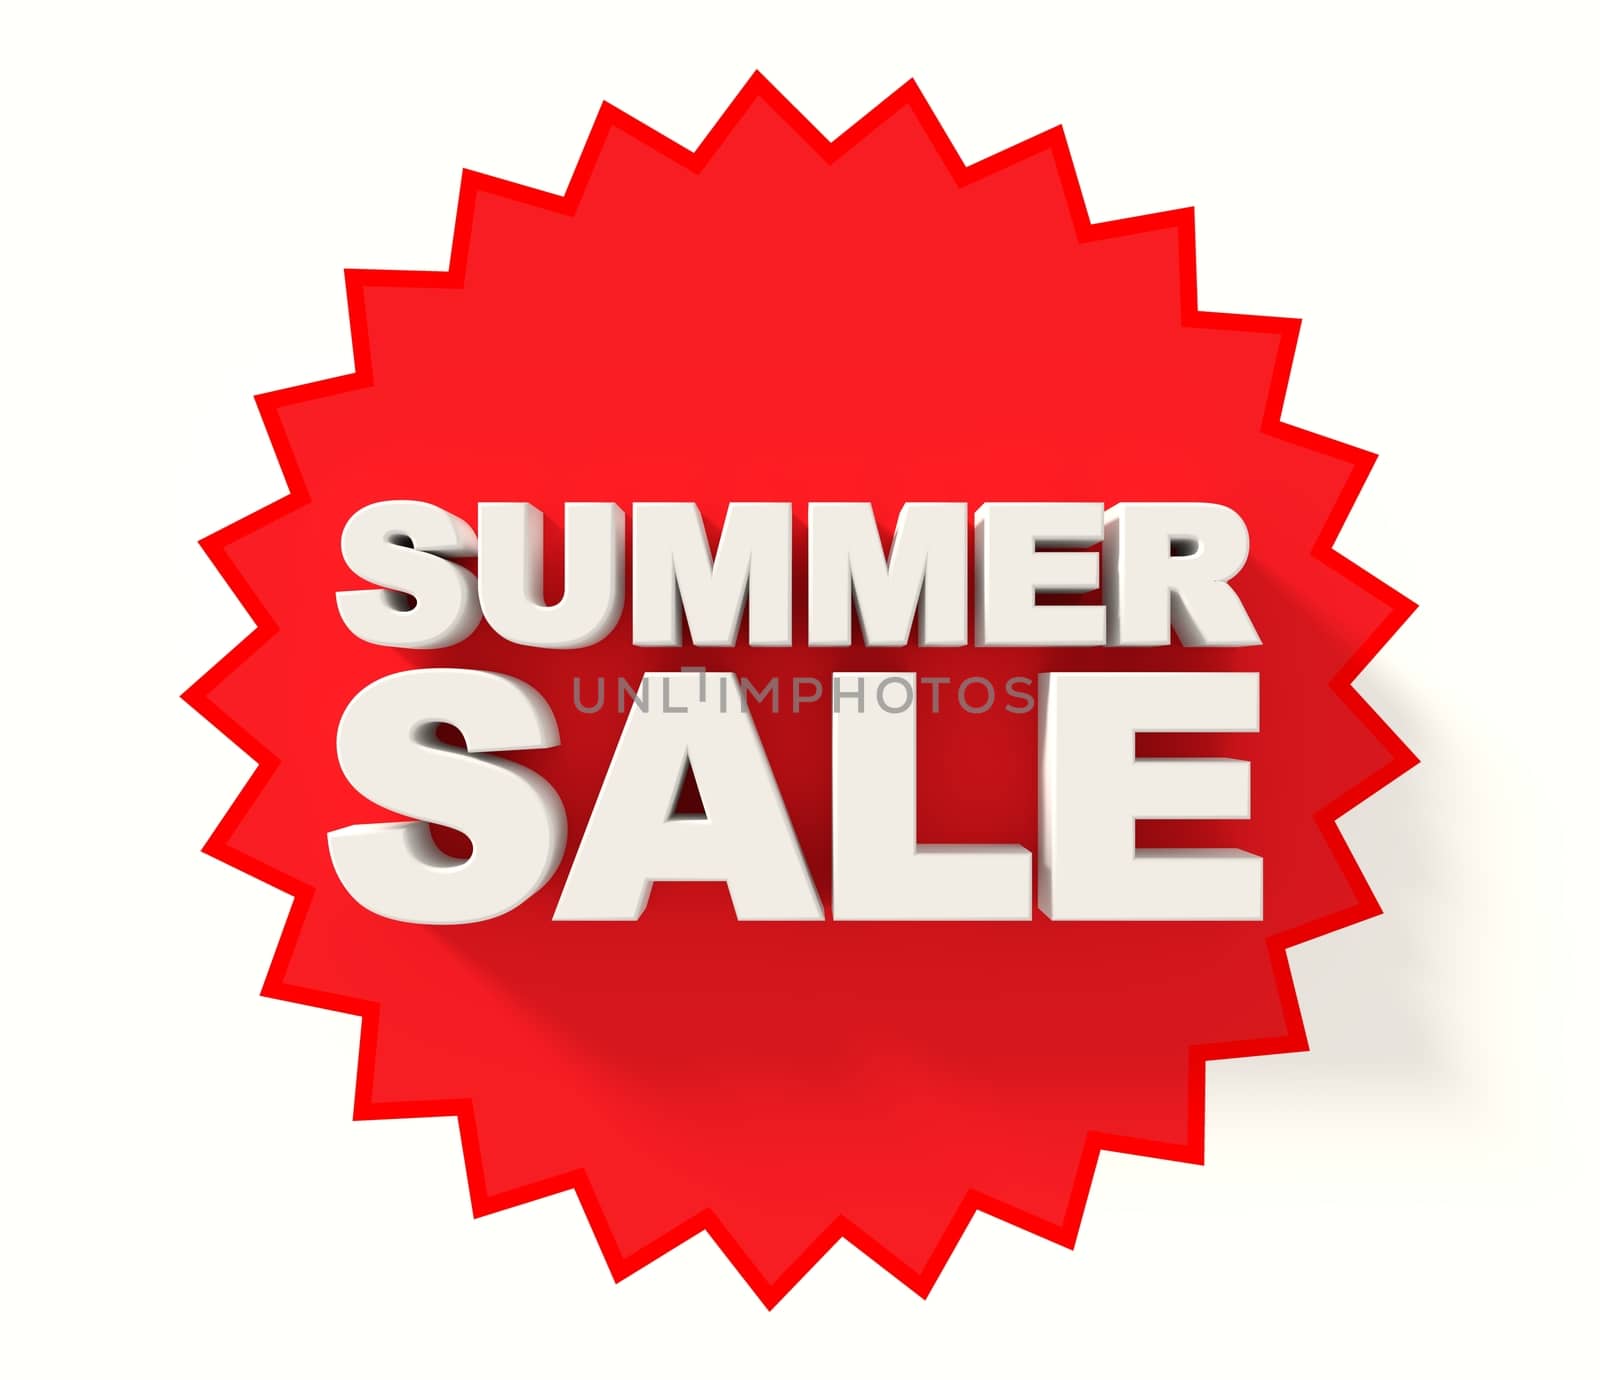 Summer sale sign, white letters on red star background